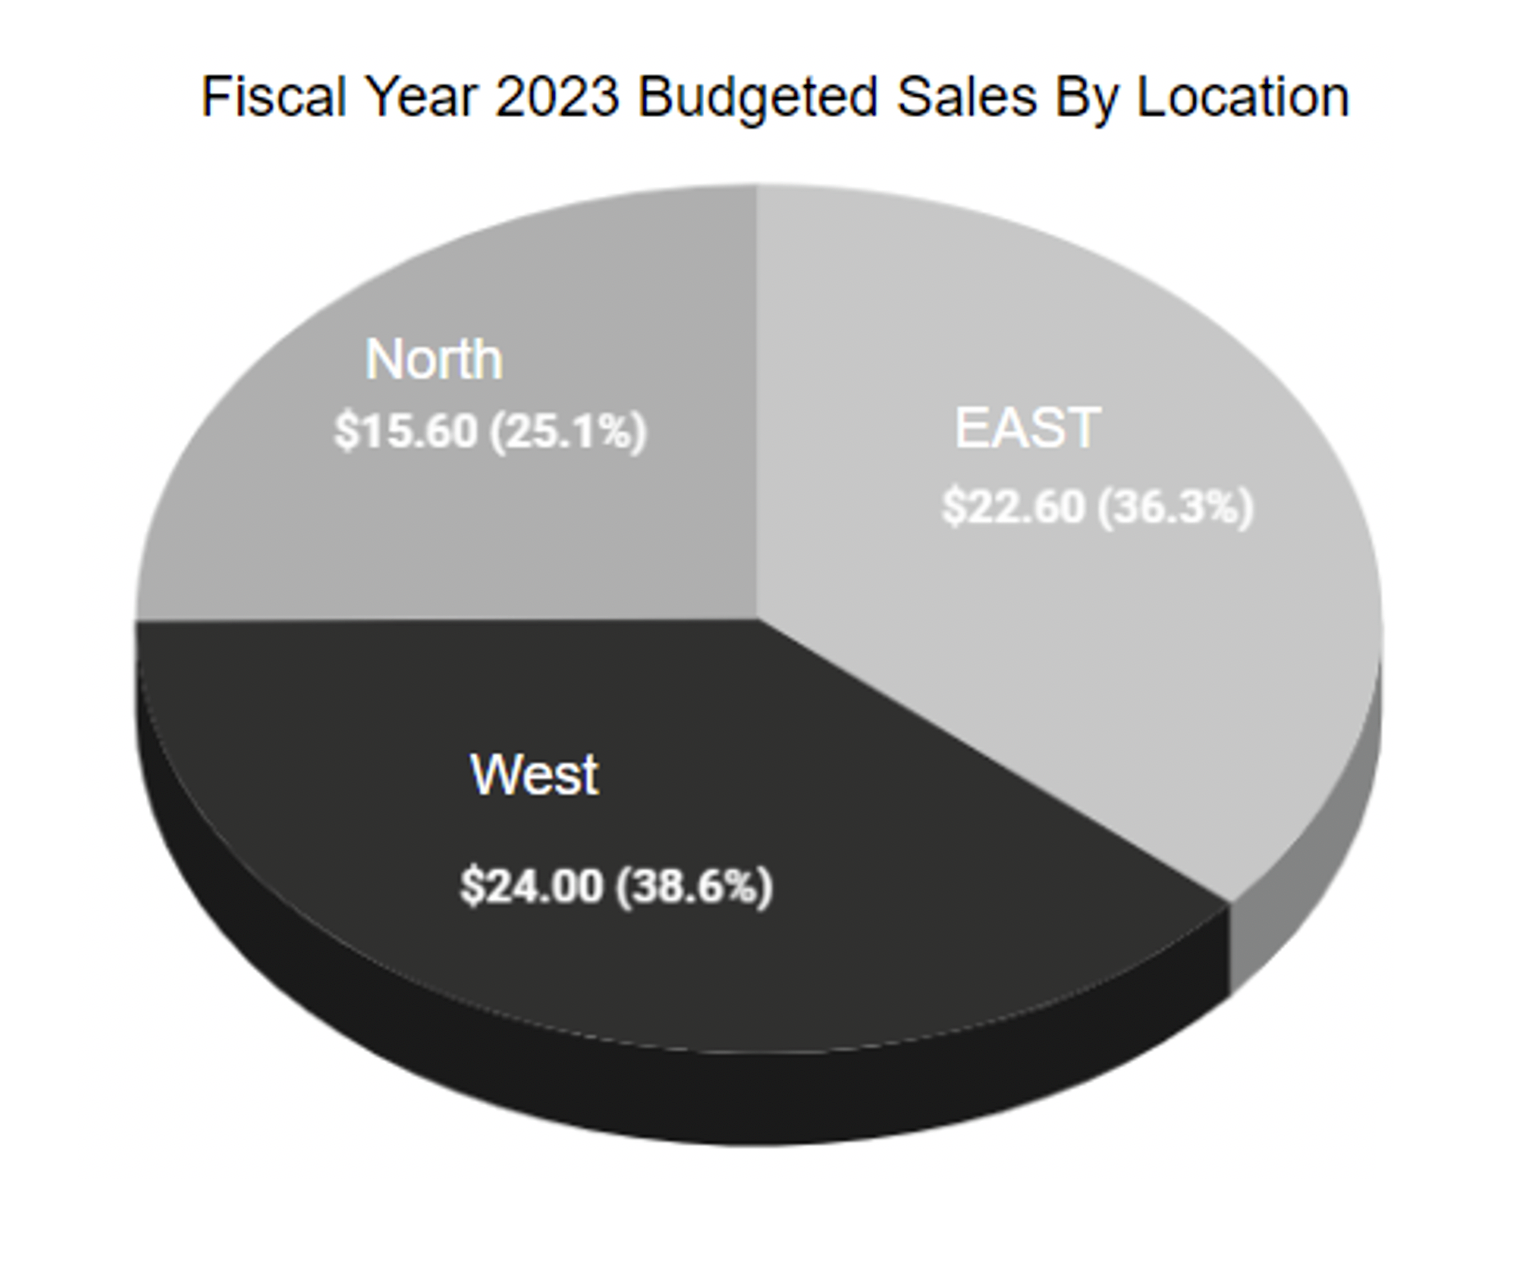 FY2023 Budgeted Sales by Location